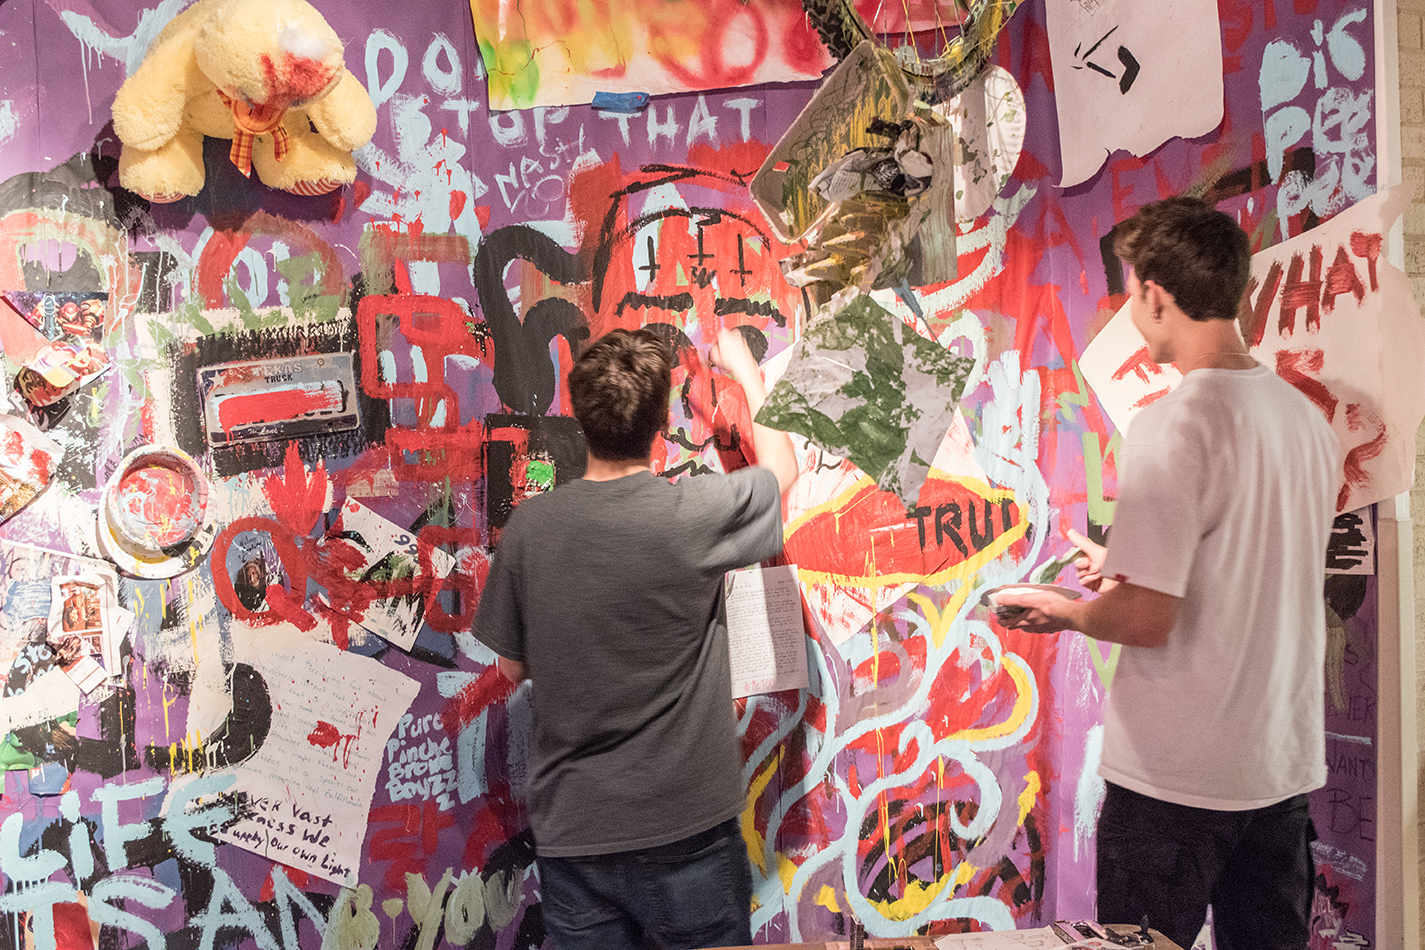 NW students Quinton Bailey and Spencer Alexander add to the collective art mural during the art-centered weeklong event in the Lakeview Gallery.